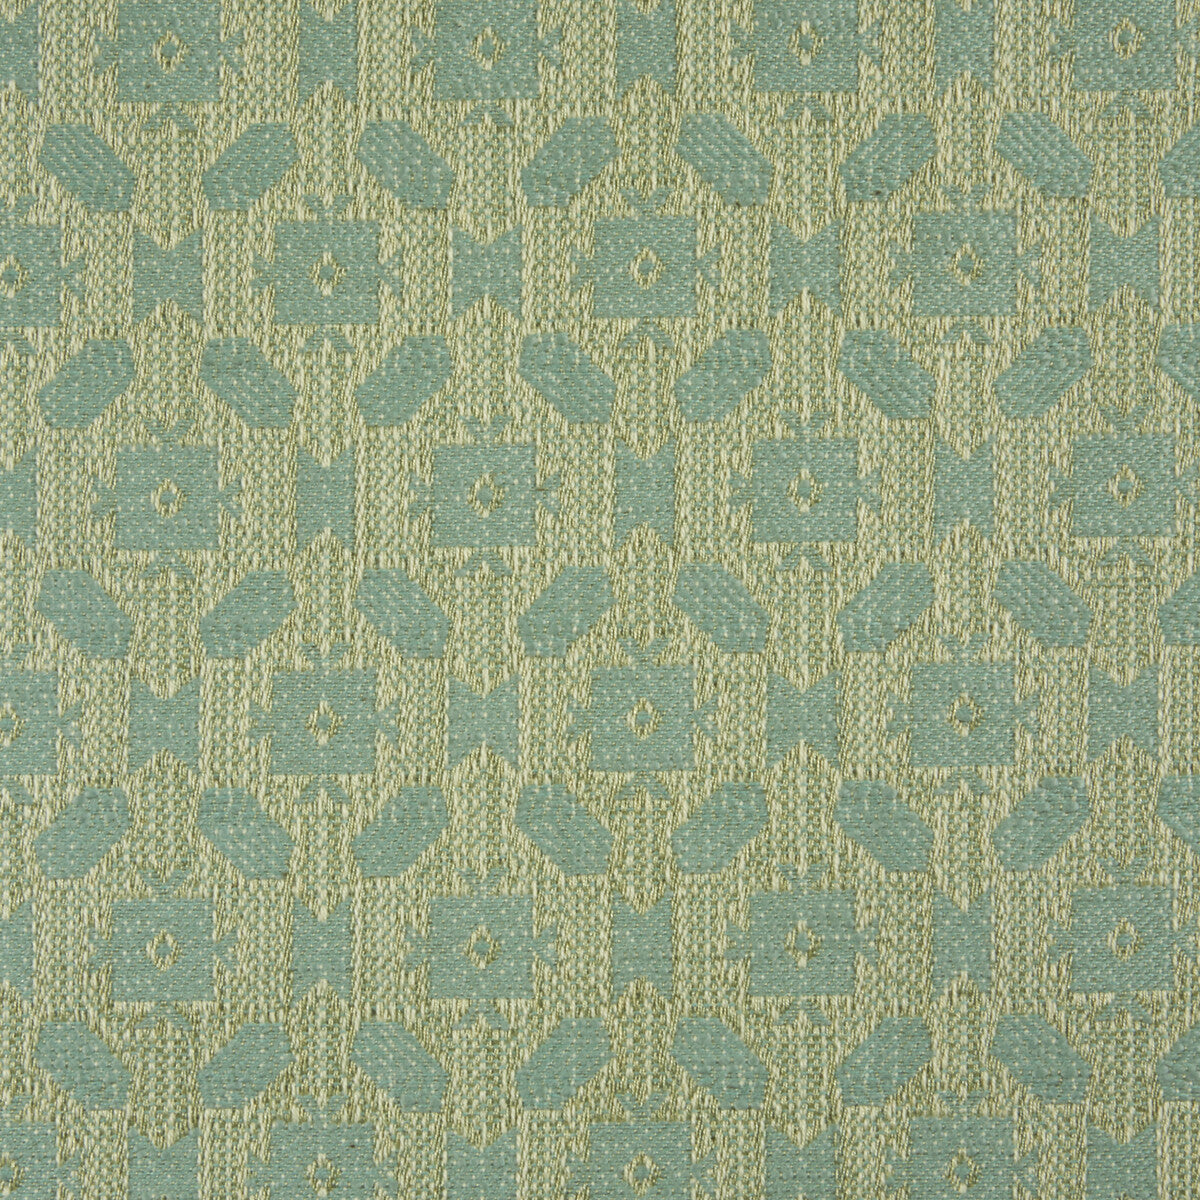 Lowell fabric in aqua color - pattern BFC-3635.513.0 - by Lee Jofa in the Blithfield collection